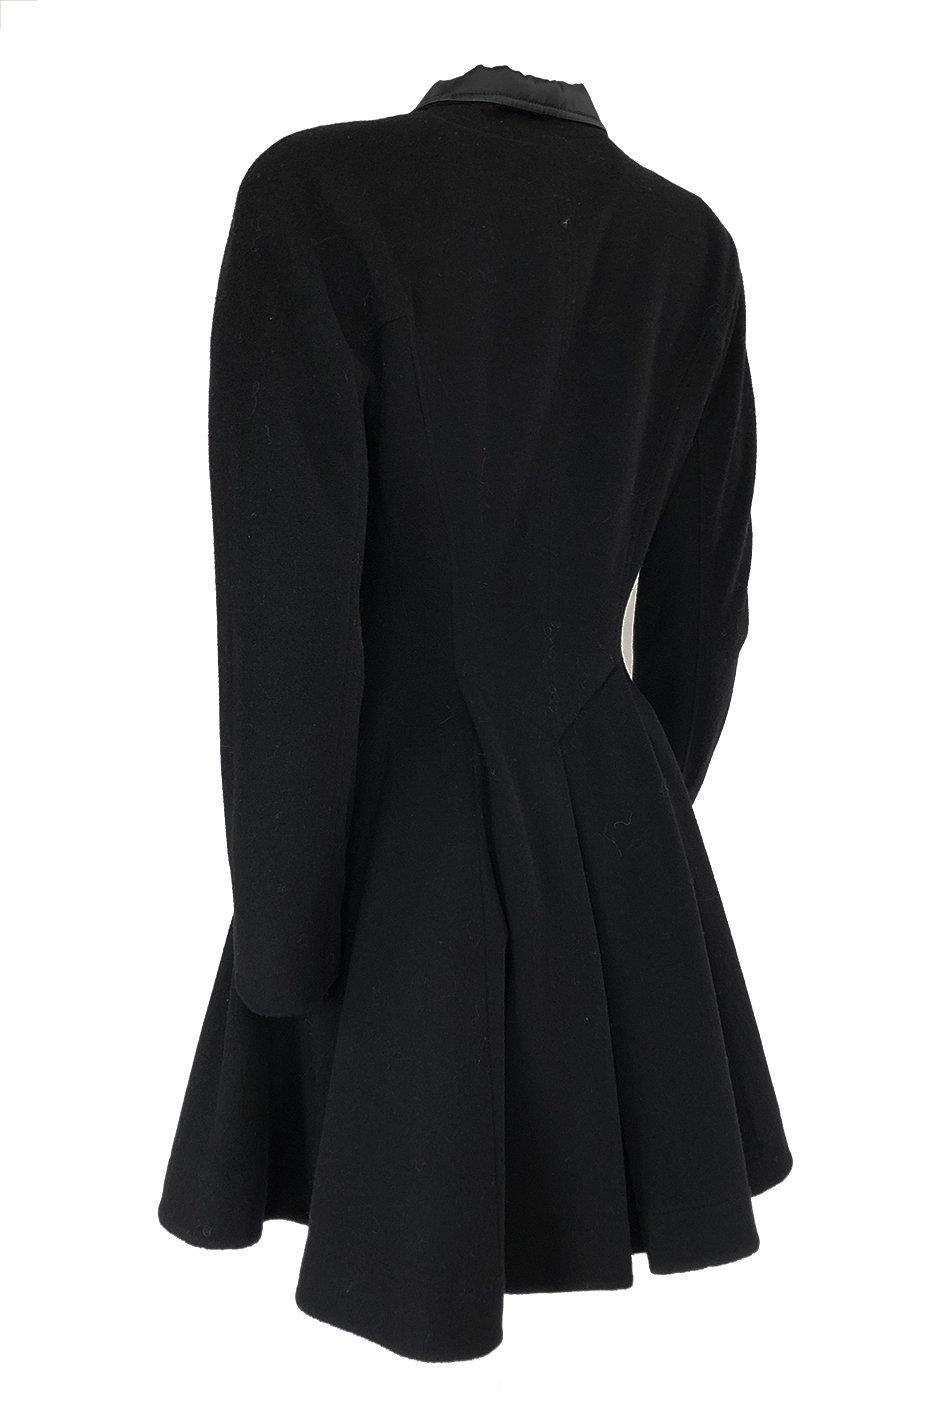 This is a wonderful little black coat by the Dior label that has a strong nod to the 1940s in the way it is cut. The top portion of the coat has lovely rounded shoulders whose seams are set to run across the shoulder and down the sleeve so there is